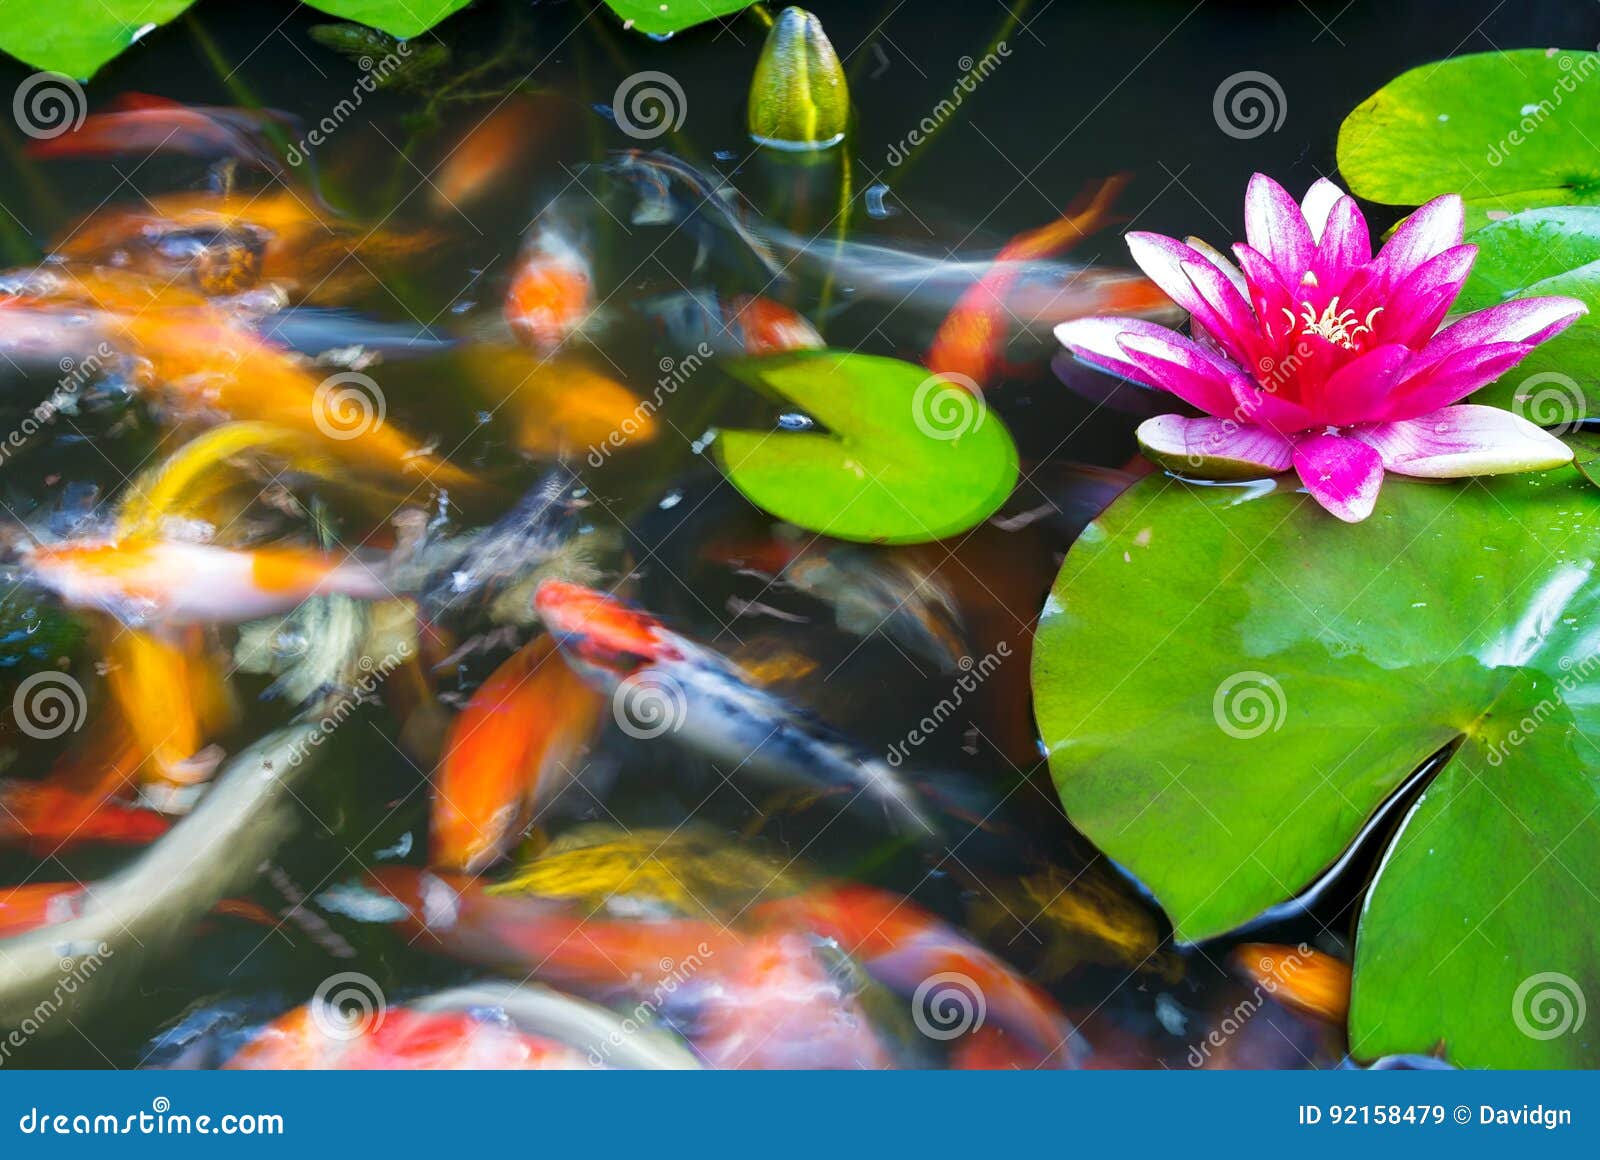 Koi Fish Swimming In The Pond With Pink Water Lily Flower Stock Image -  Image Of Floating, Water: 92158479